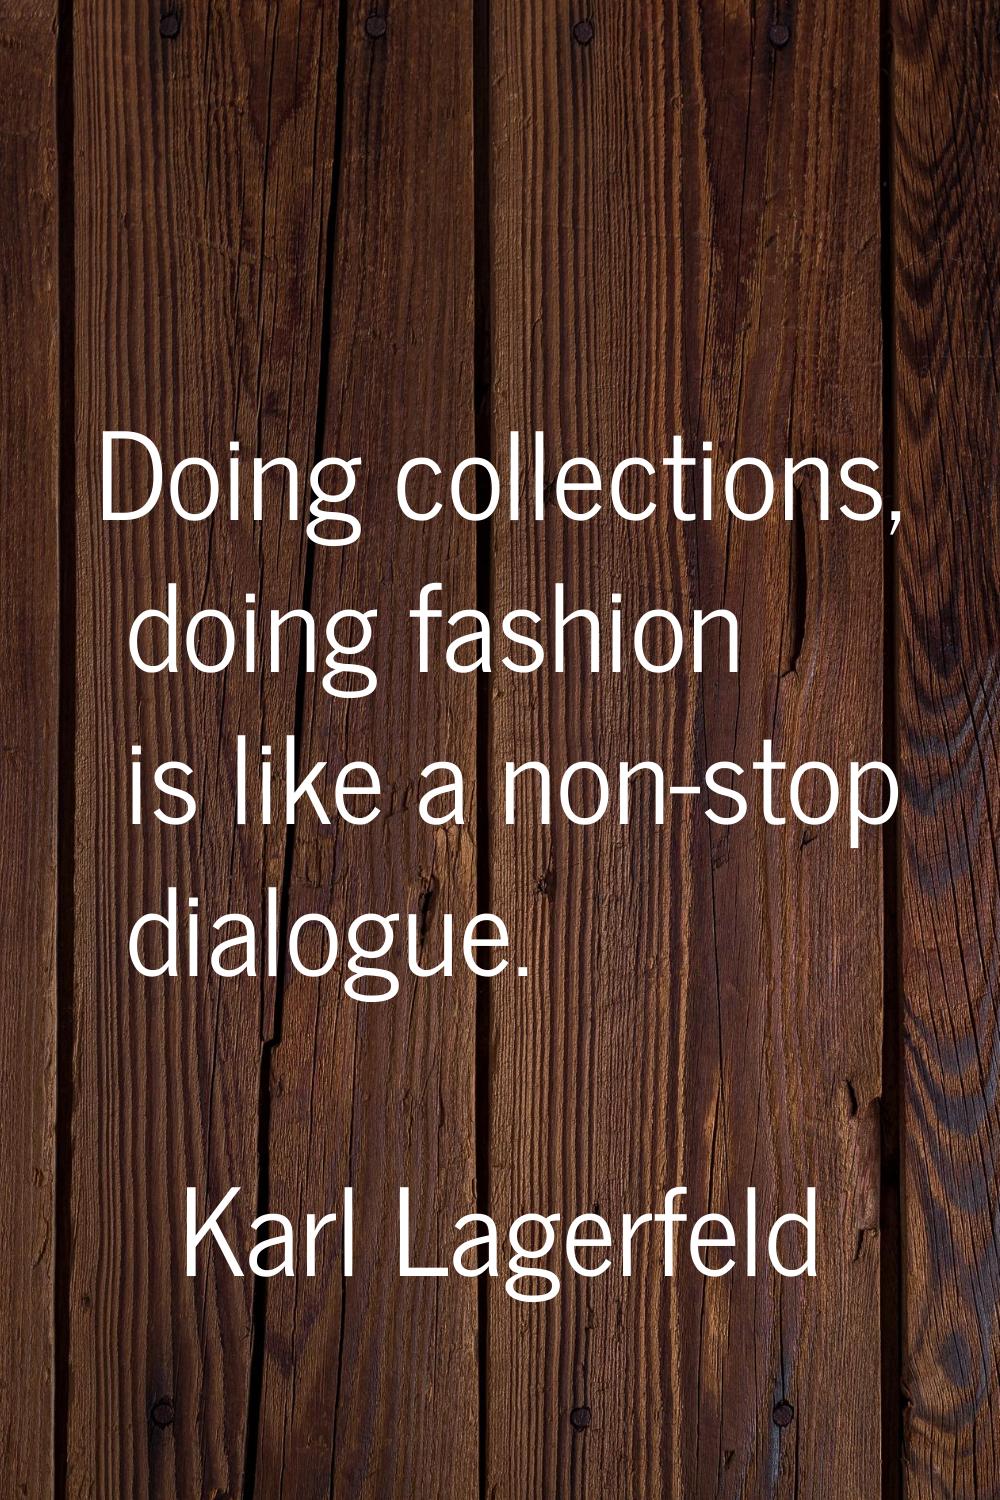 Doing collections, doing fashion is like a non-stop dialogue.